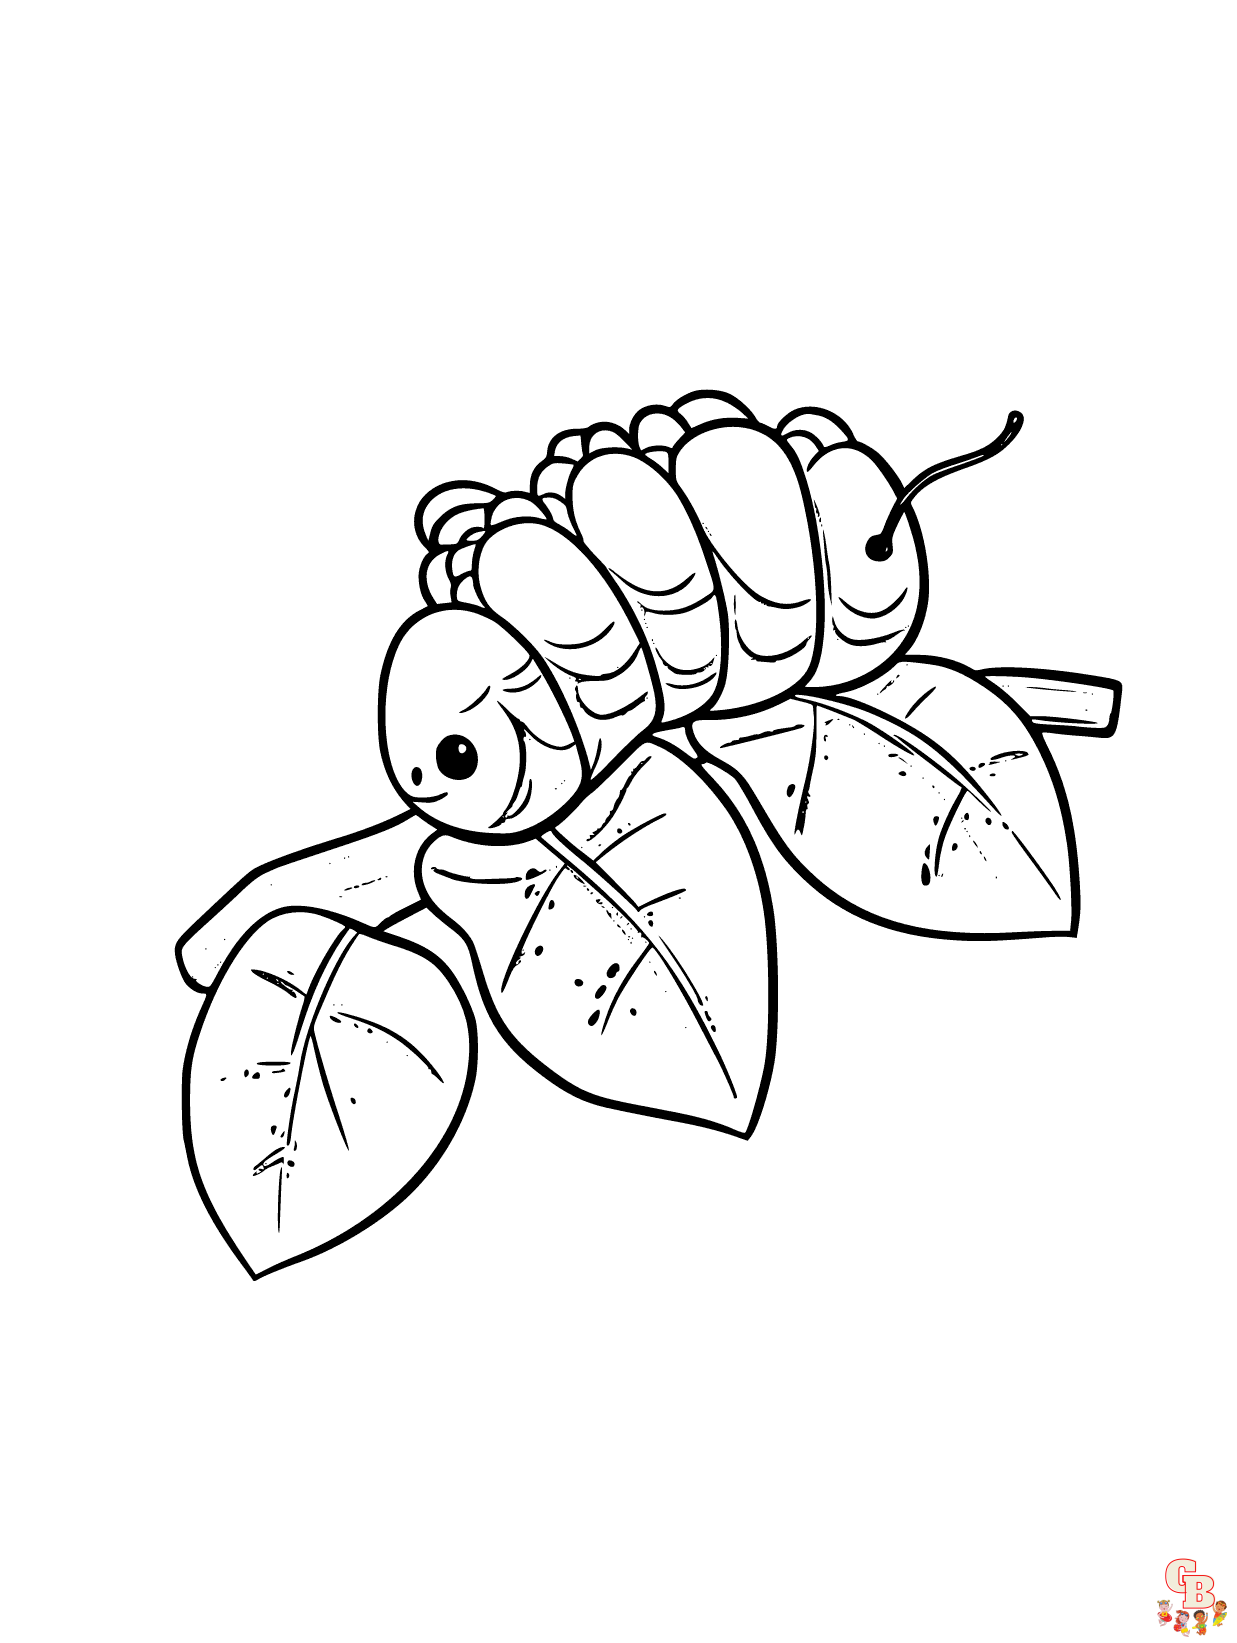 Caterpillar coloring pages printable